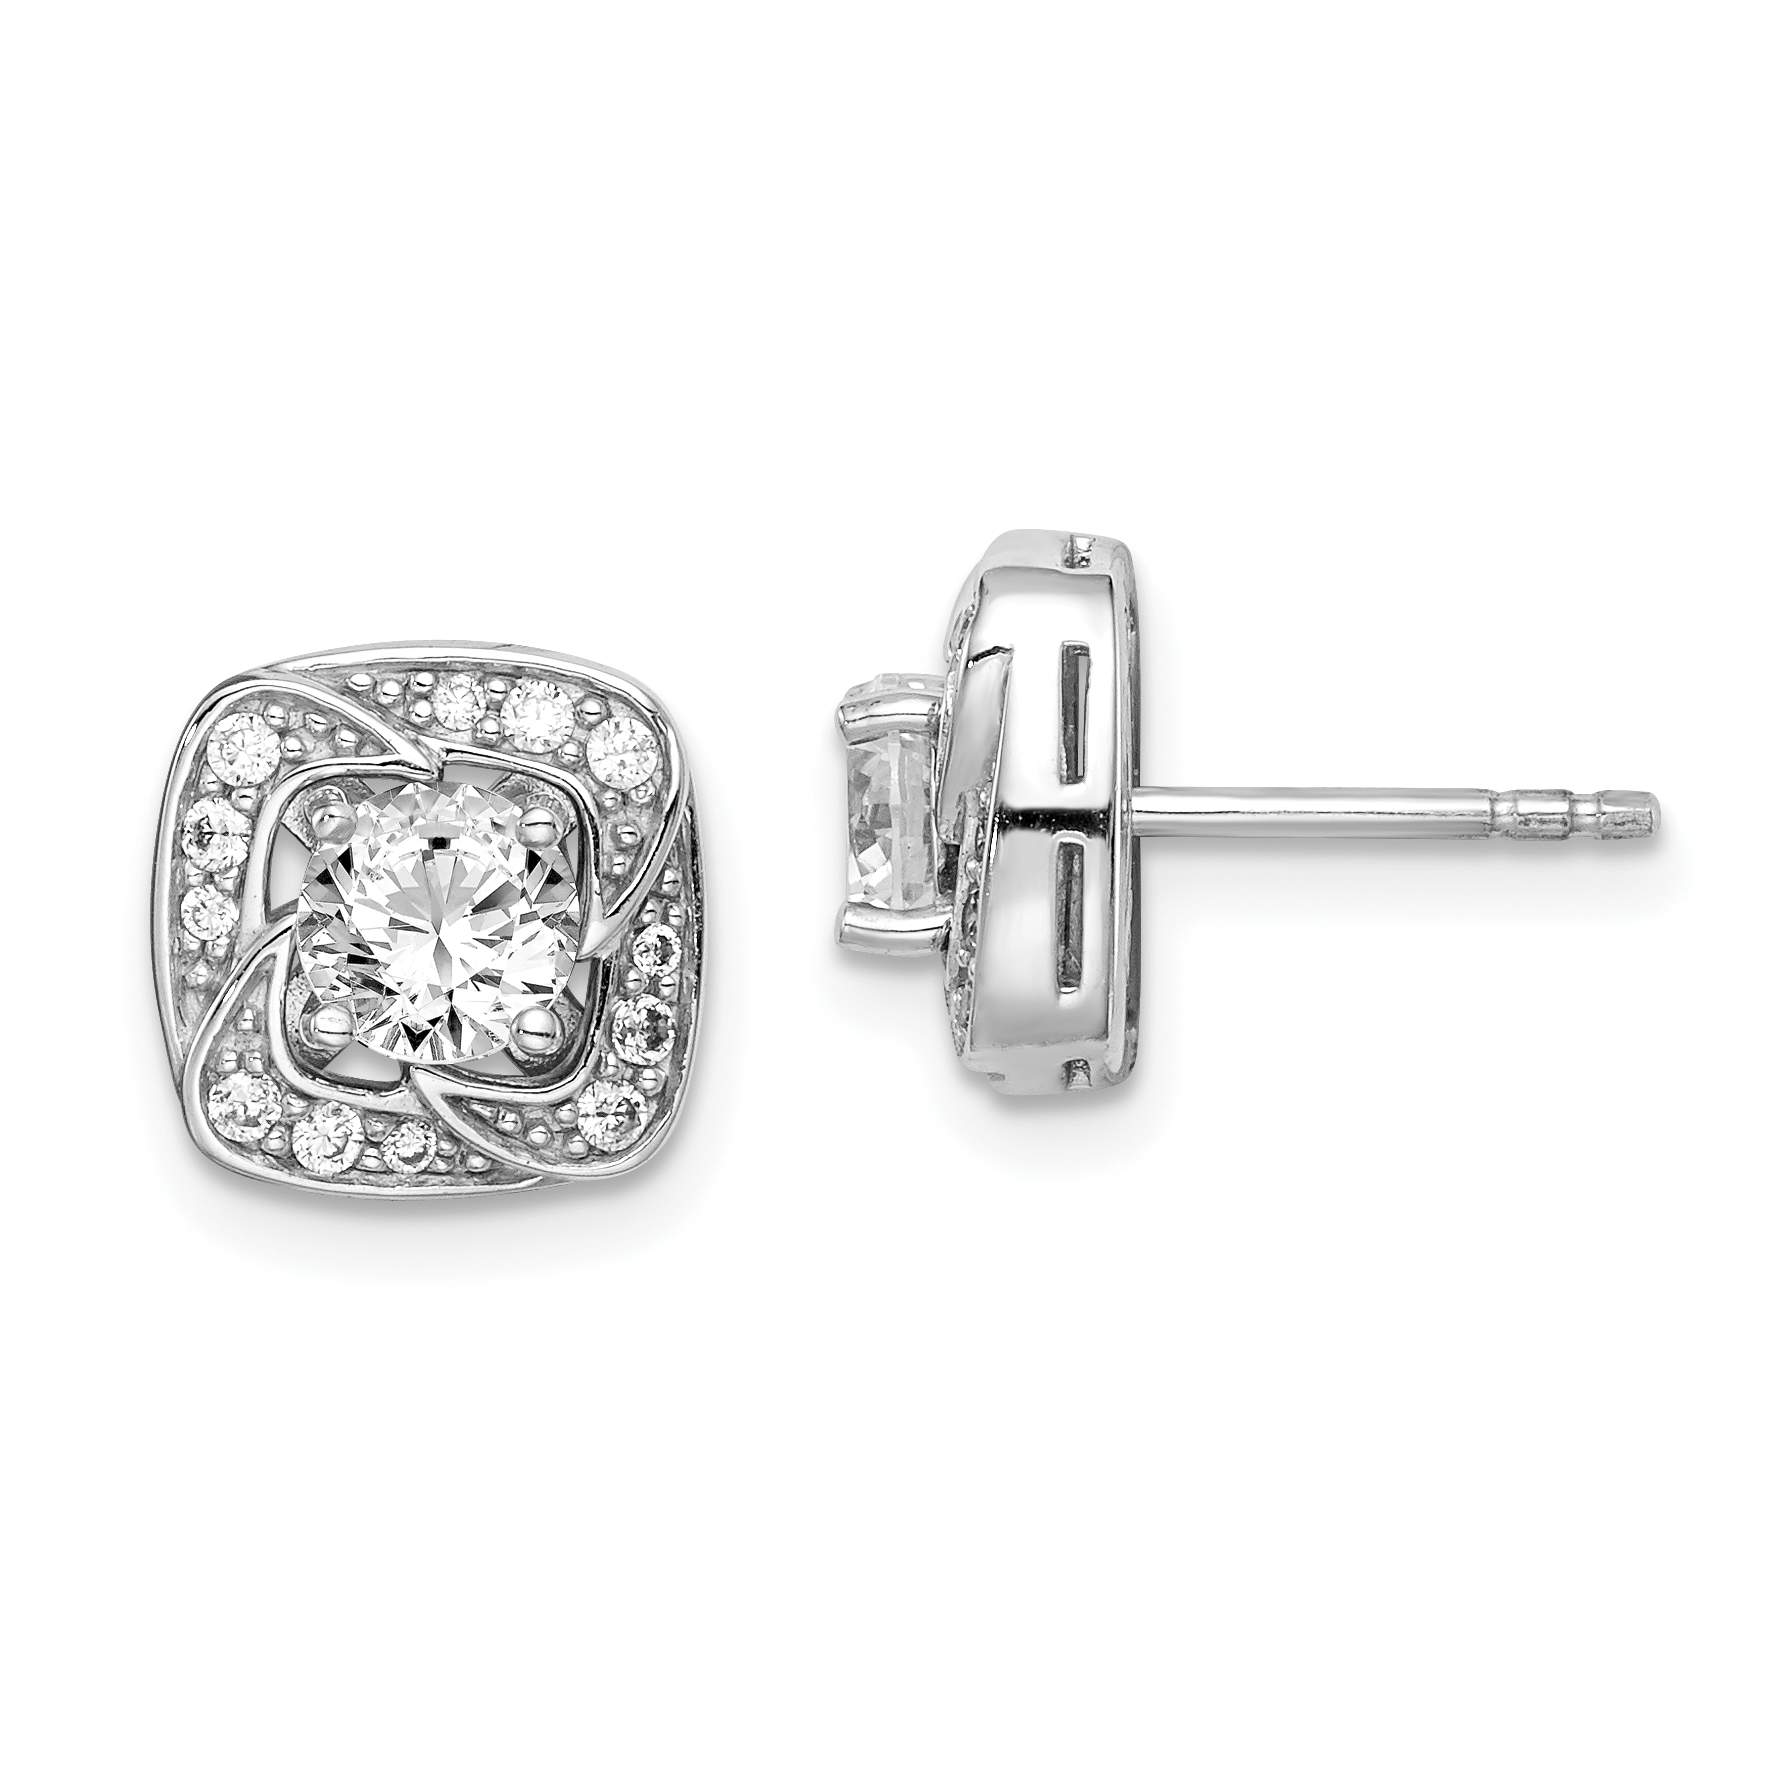 Sterling Silver Rhodium-plated 5mm Round CZ Earrings w/Square Jackets